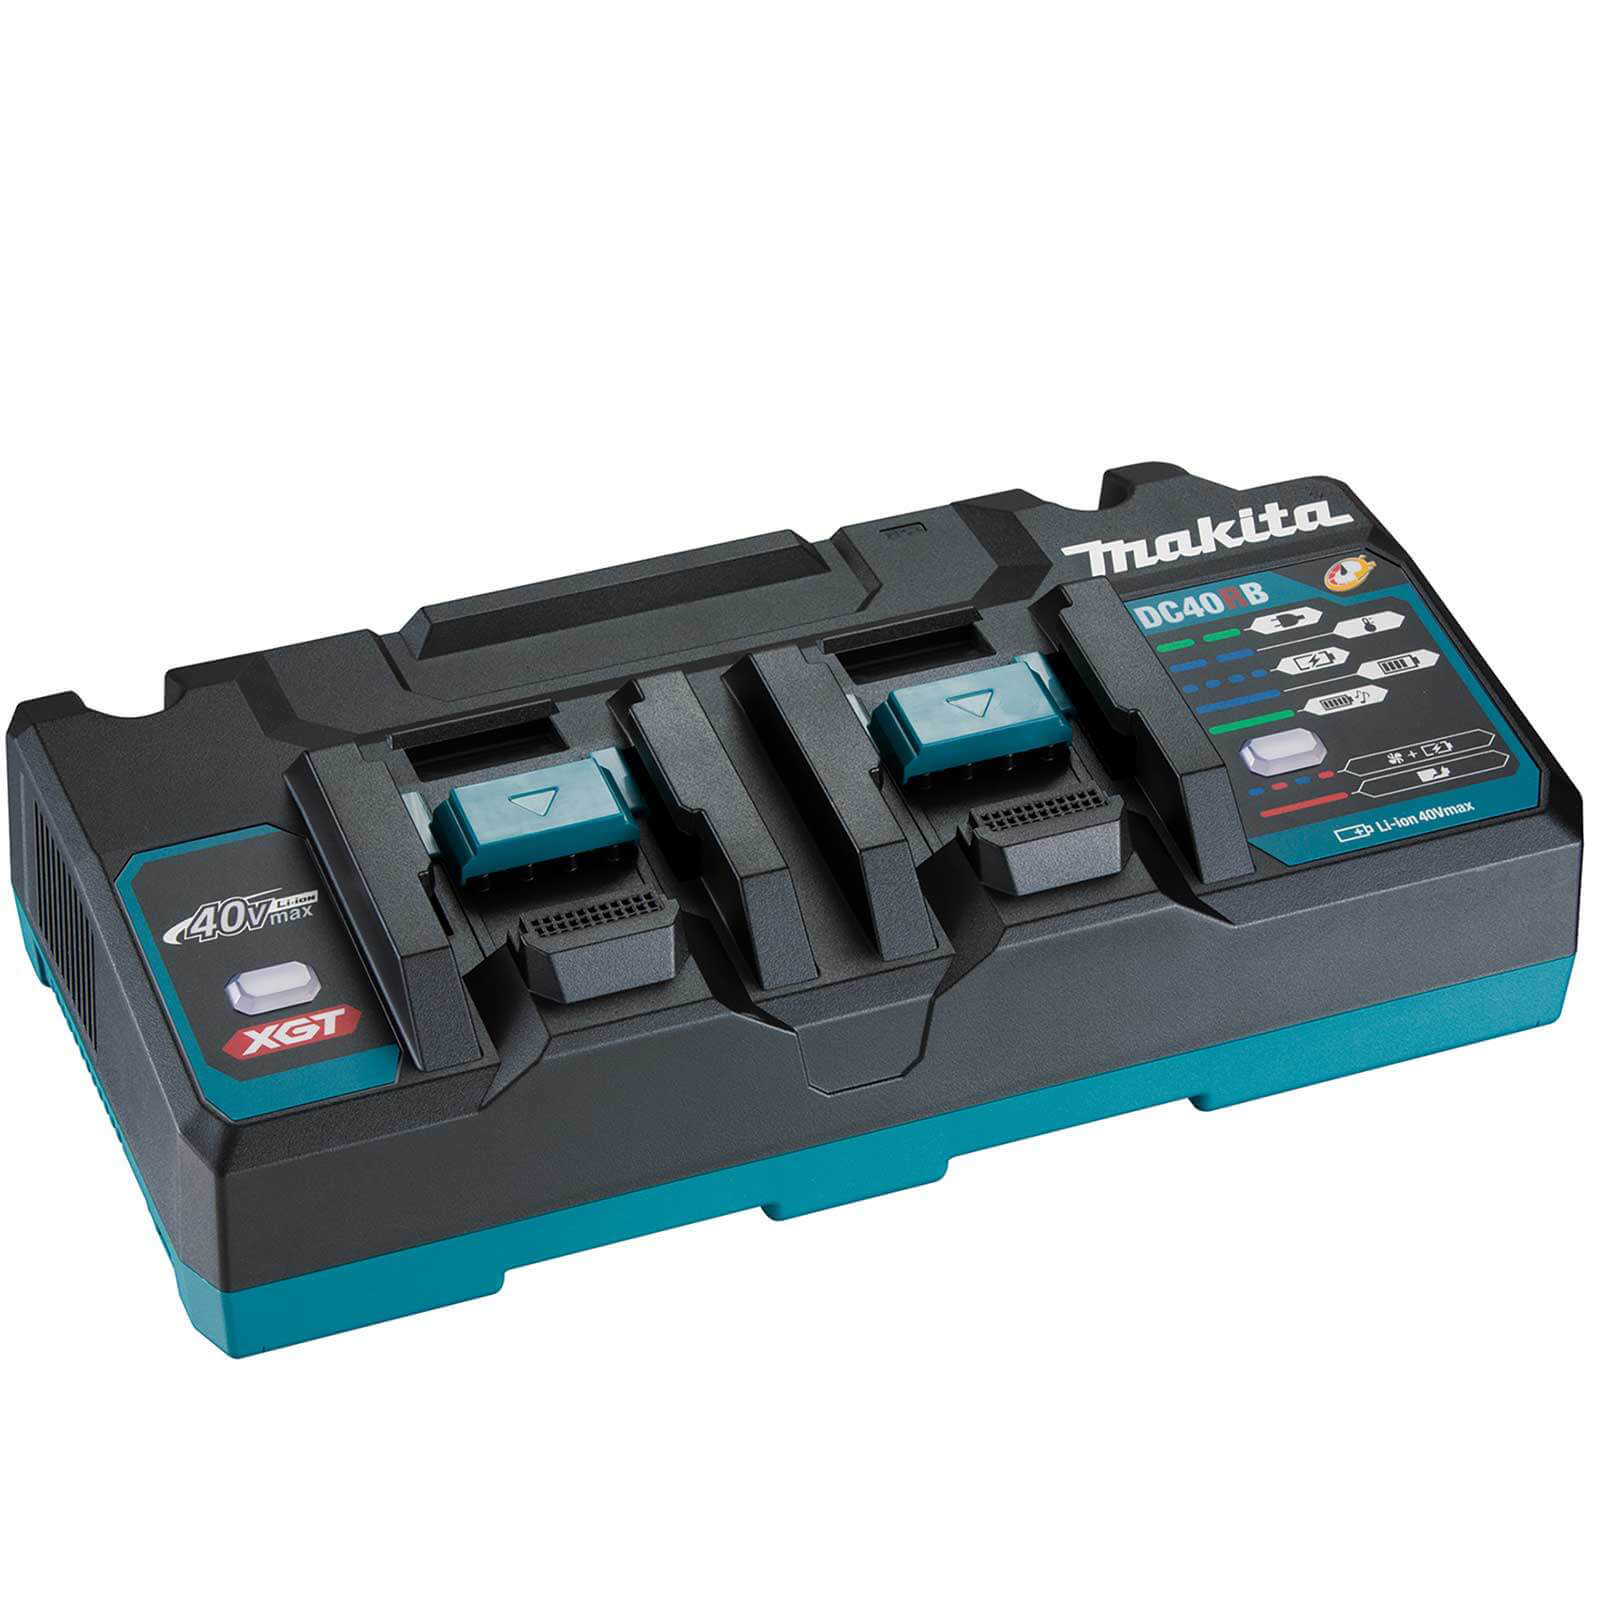 Photo of Makita Dc40rb Xgt 40v Max Twin Port Battery Fast Charger 110v